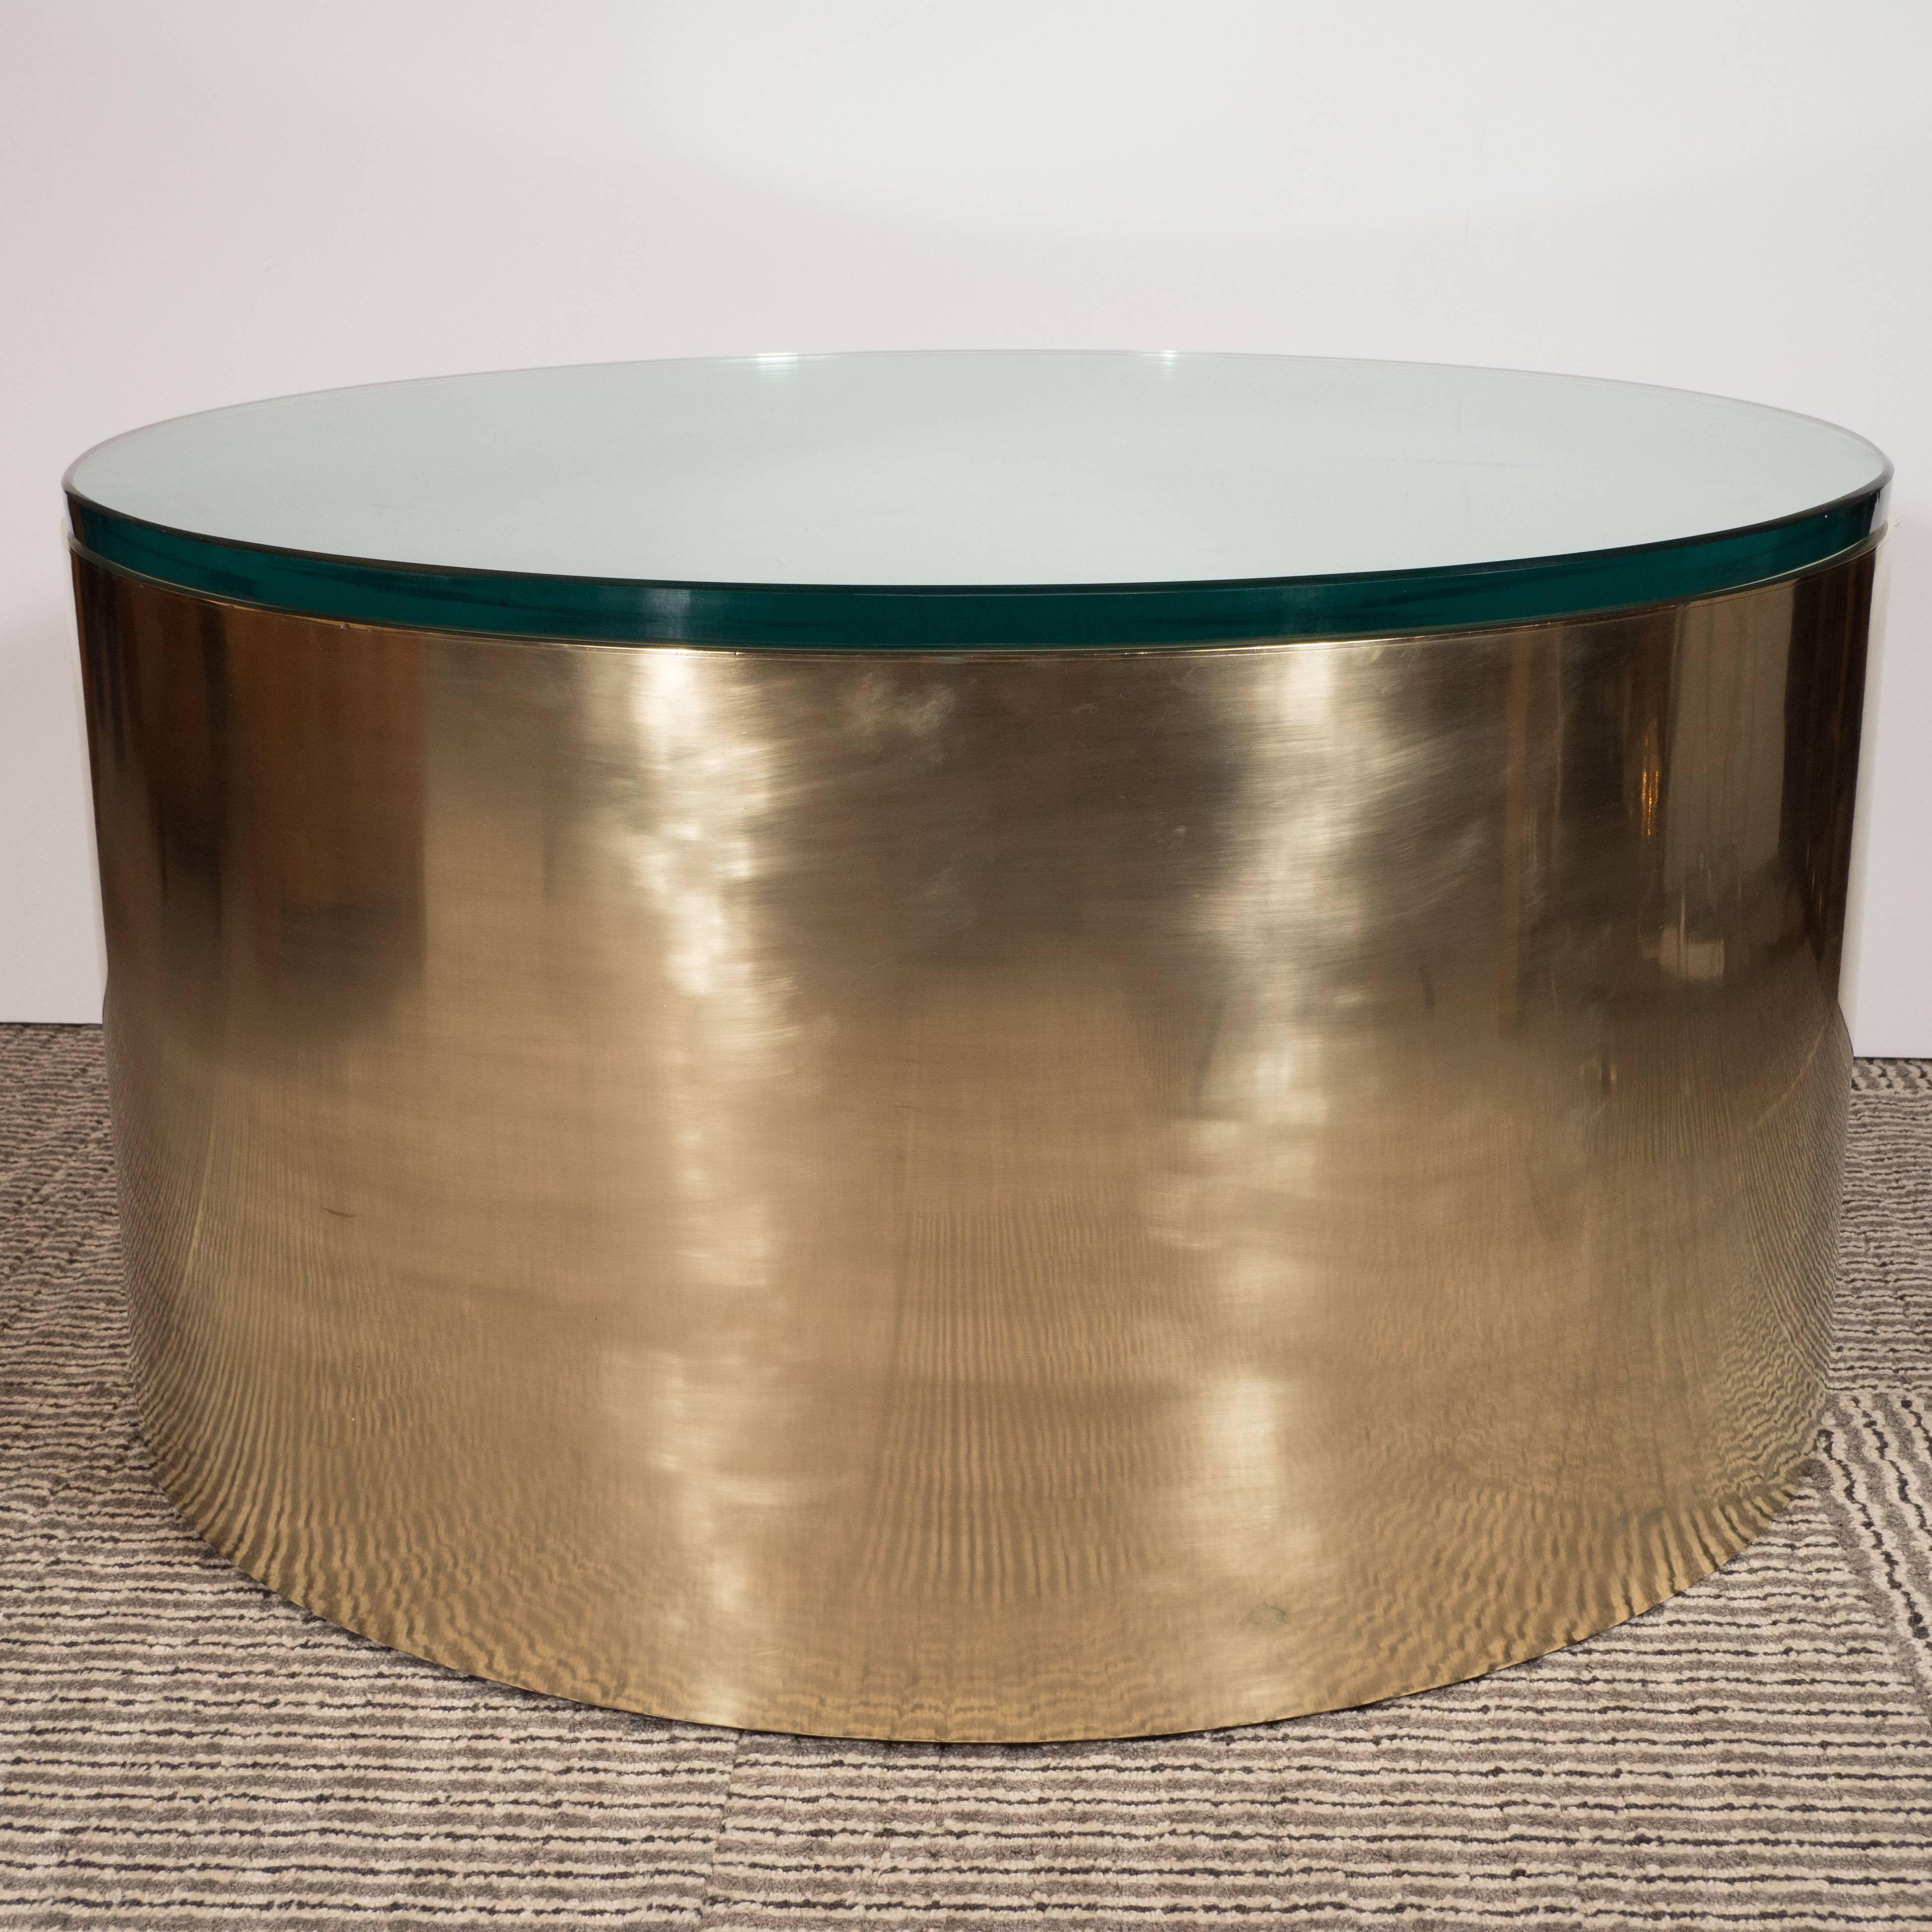 American Mid-Century Modern Brass and Glass Cocktail Table in the Manner of Karl Springer